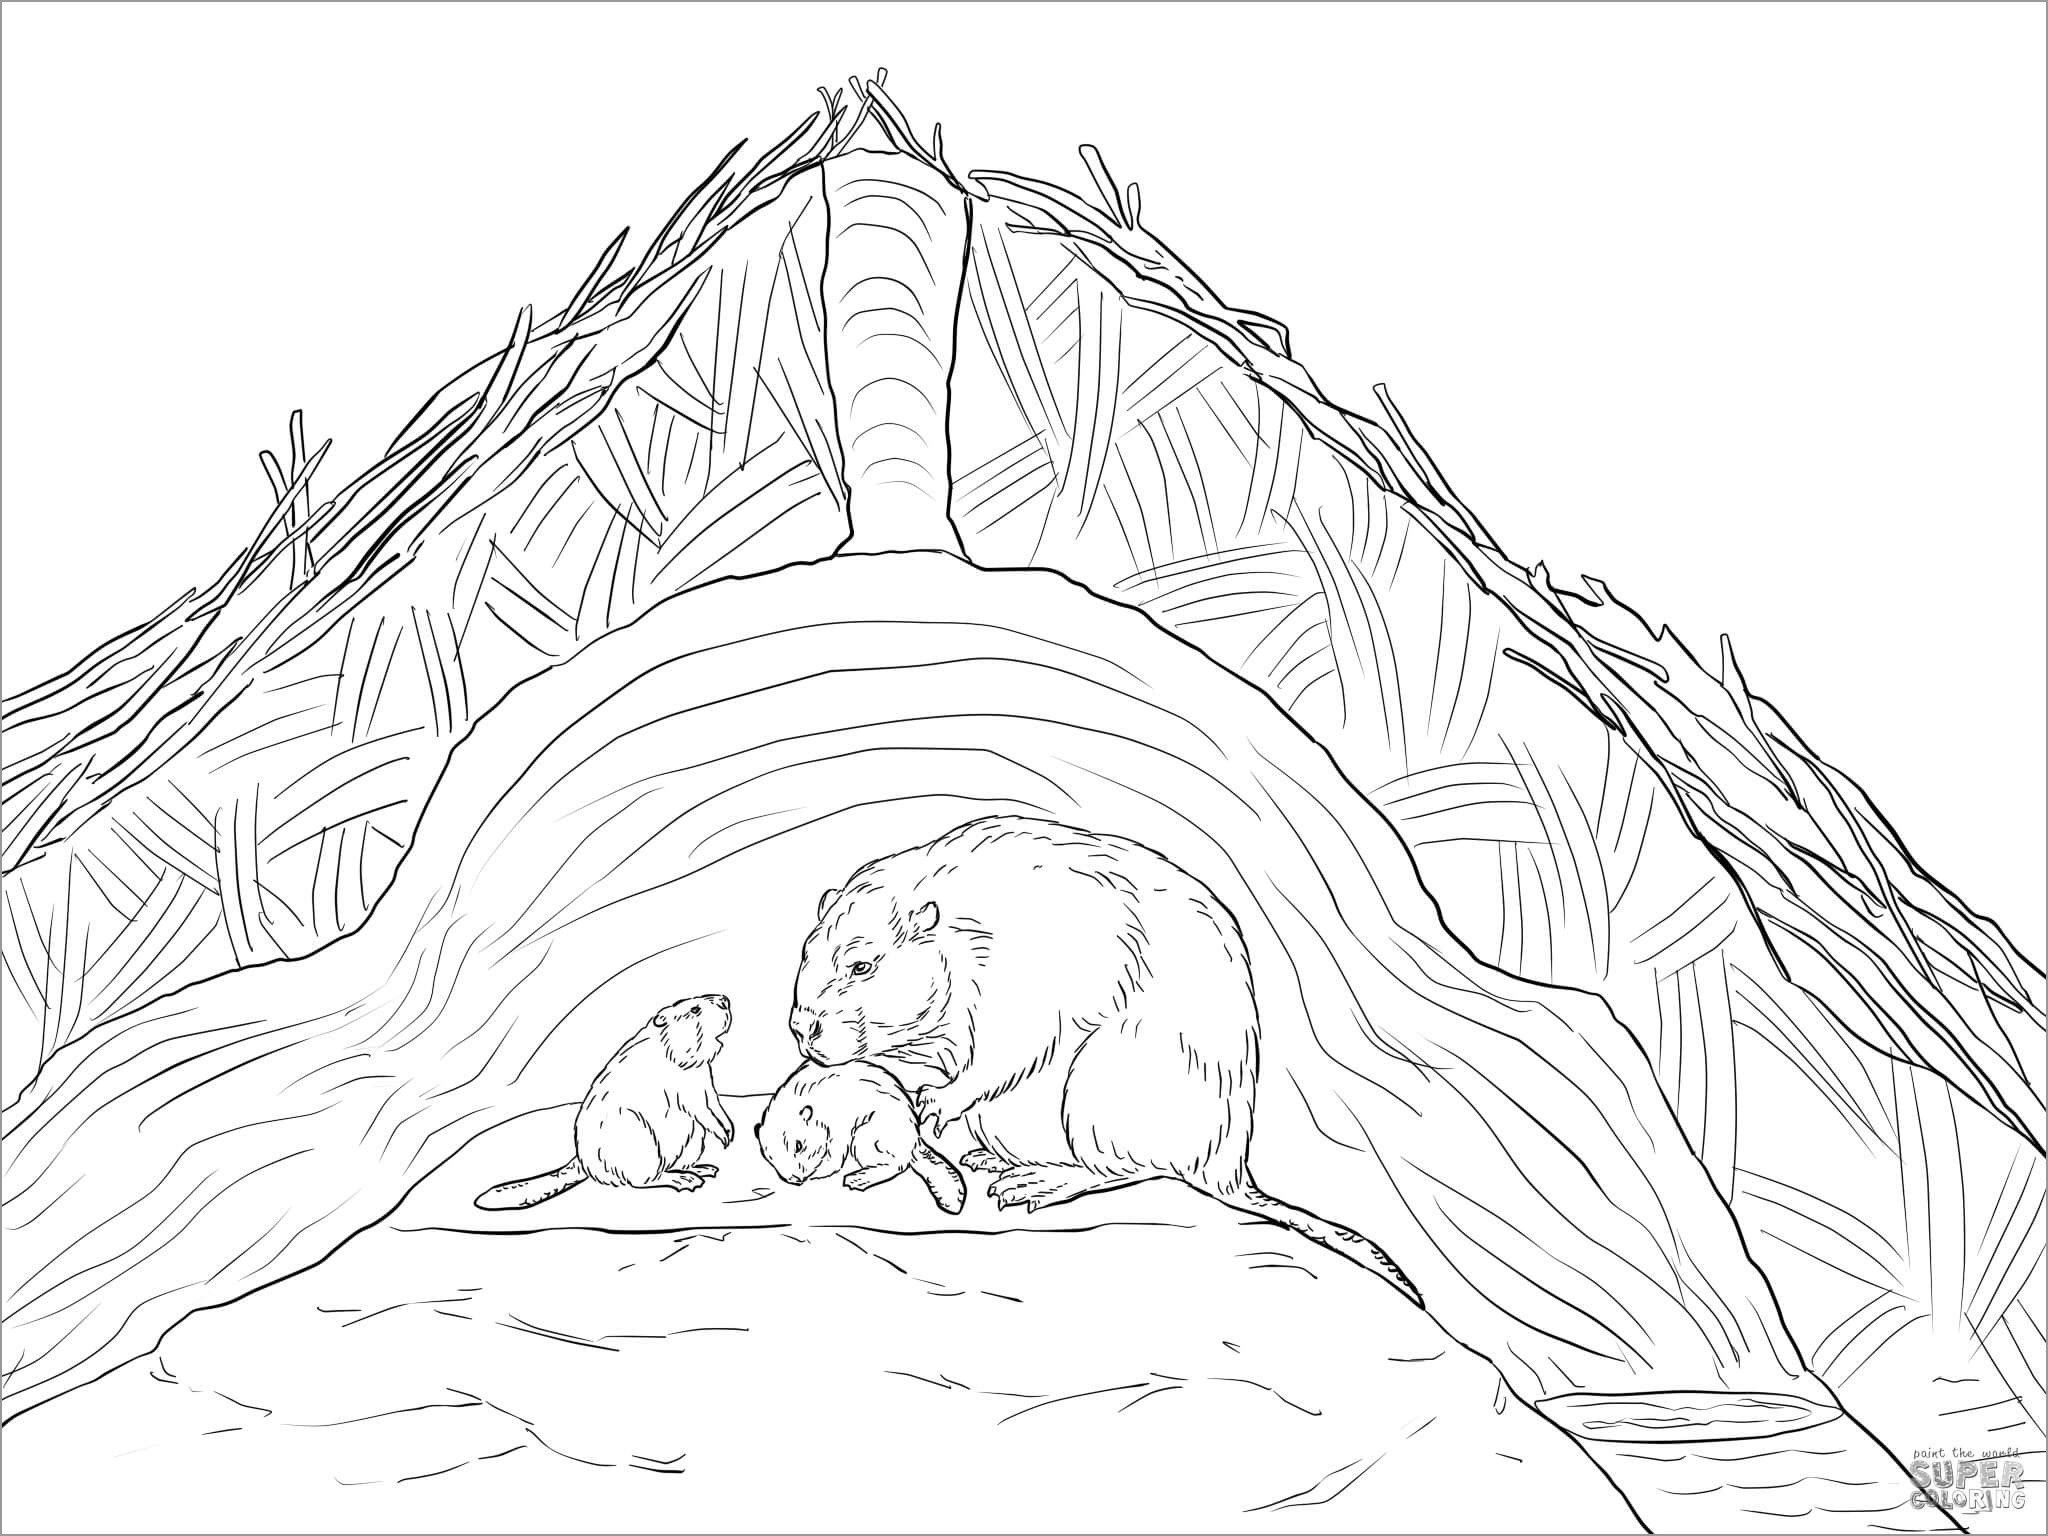 Beaver and Baby In Lodge Coloring Page